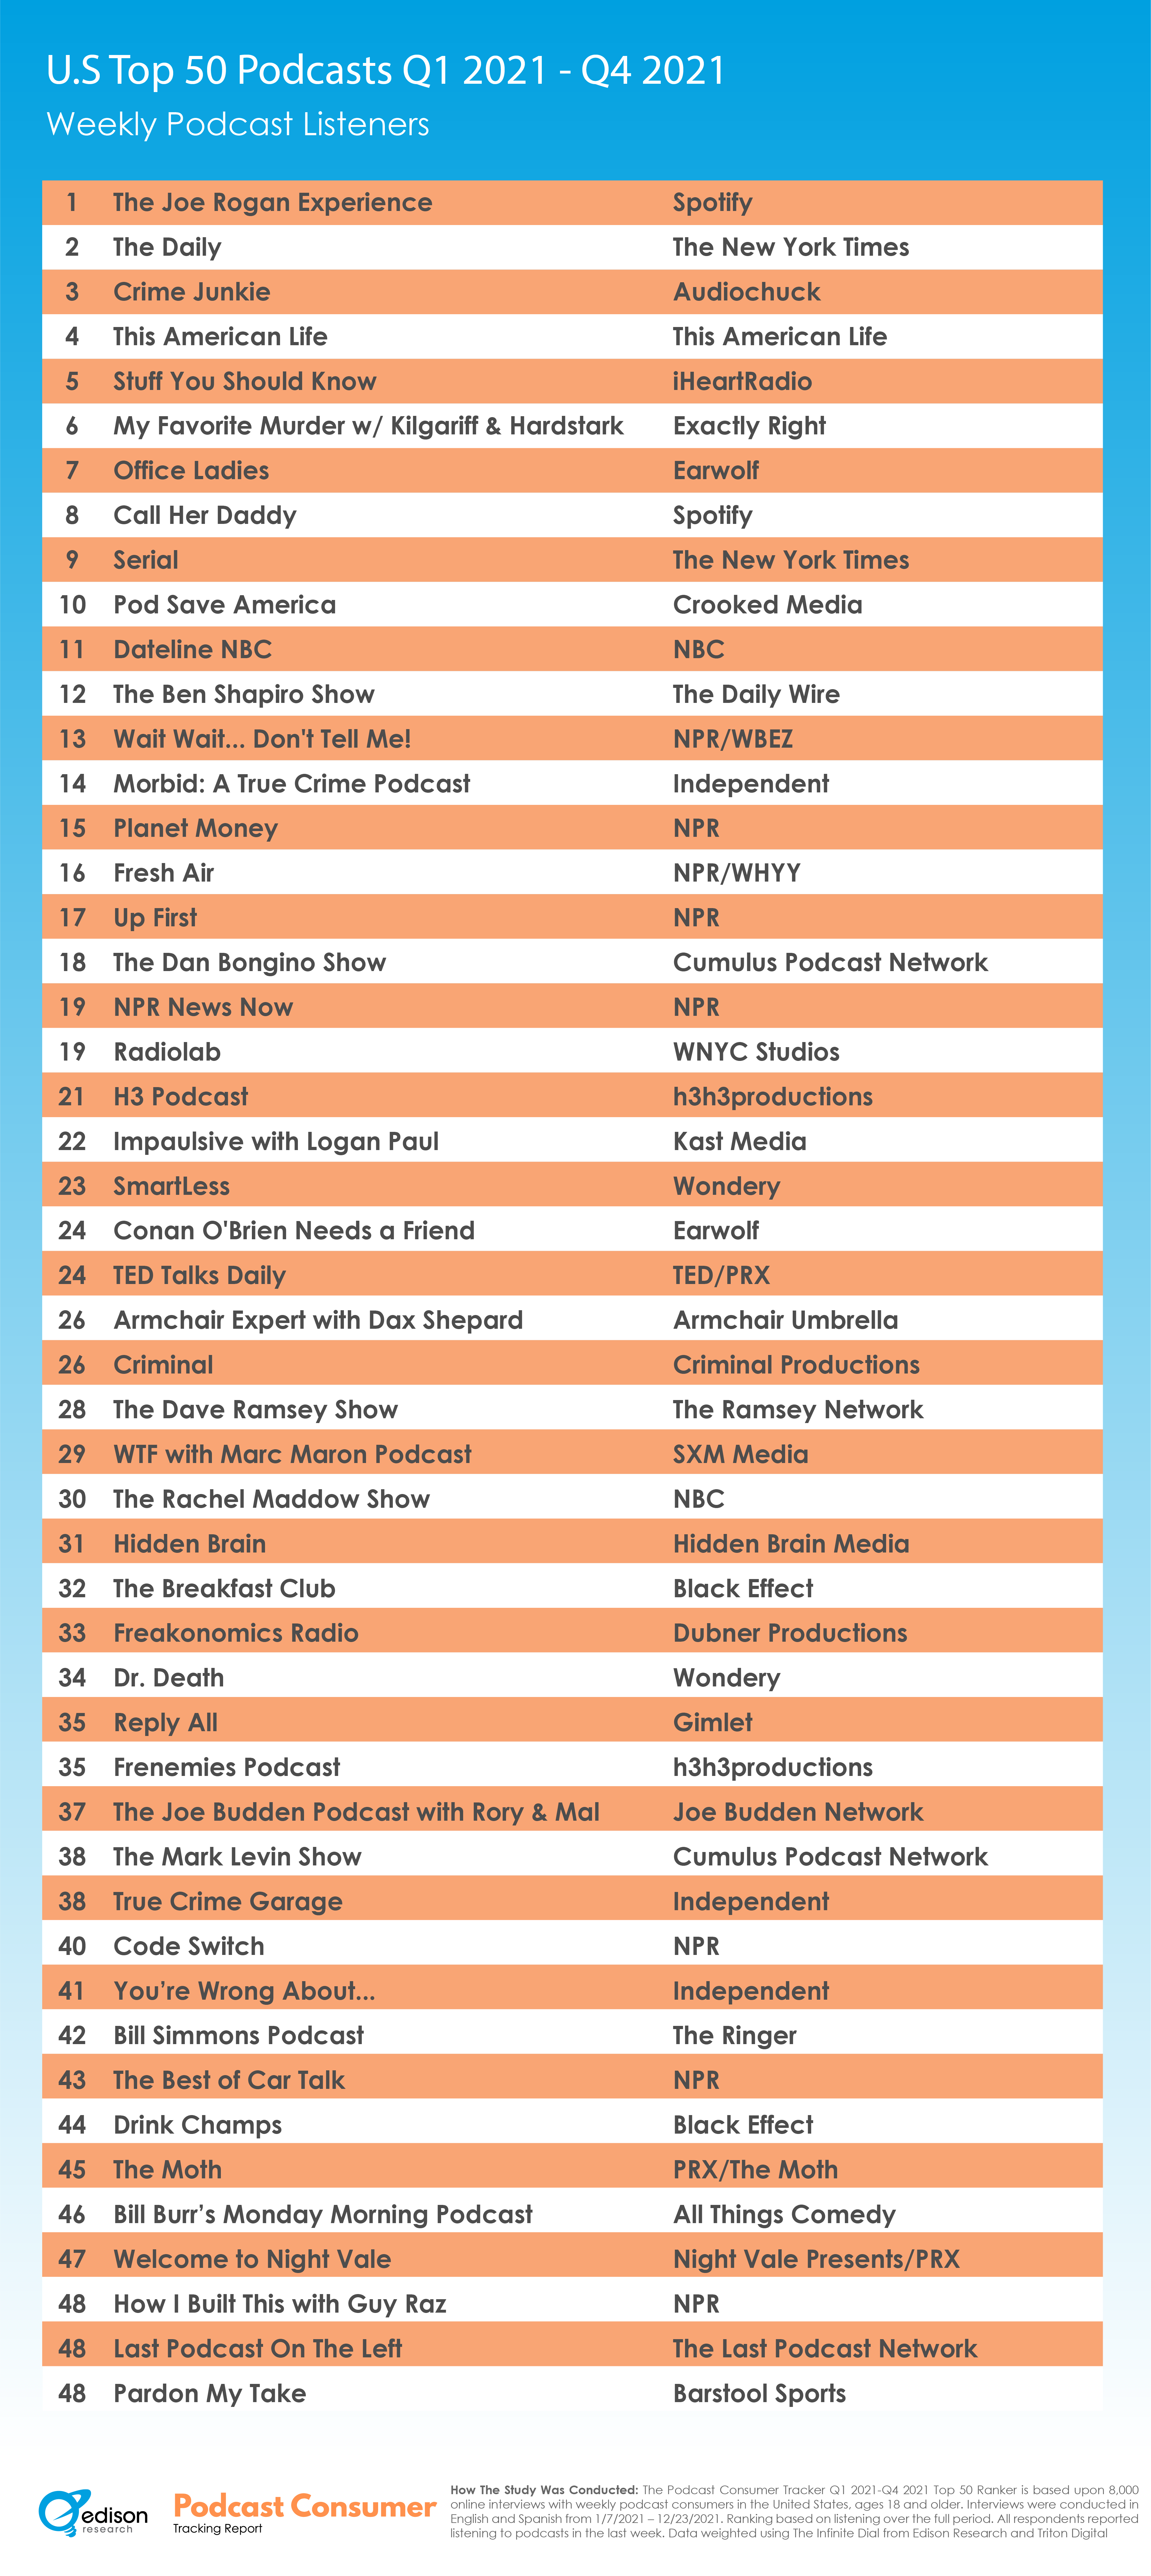 The Top 50 Most Listened To Podcasts in the U.S. Q4 2021 Edison Research